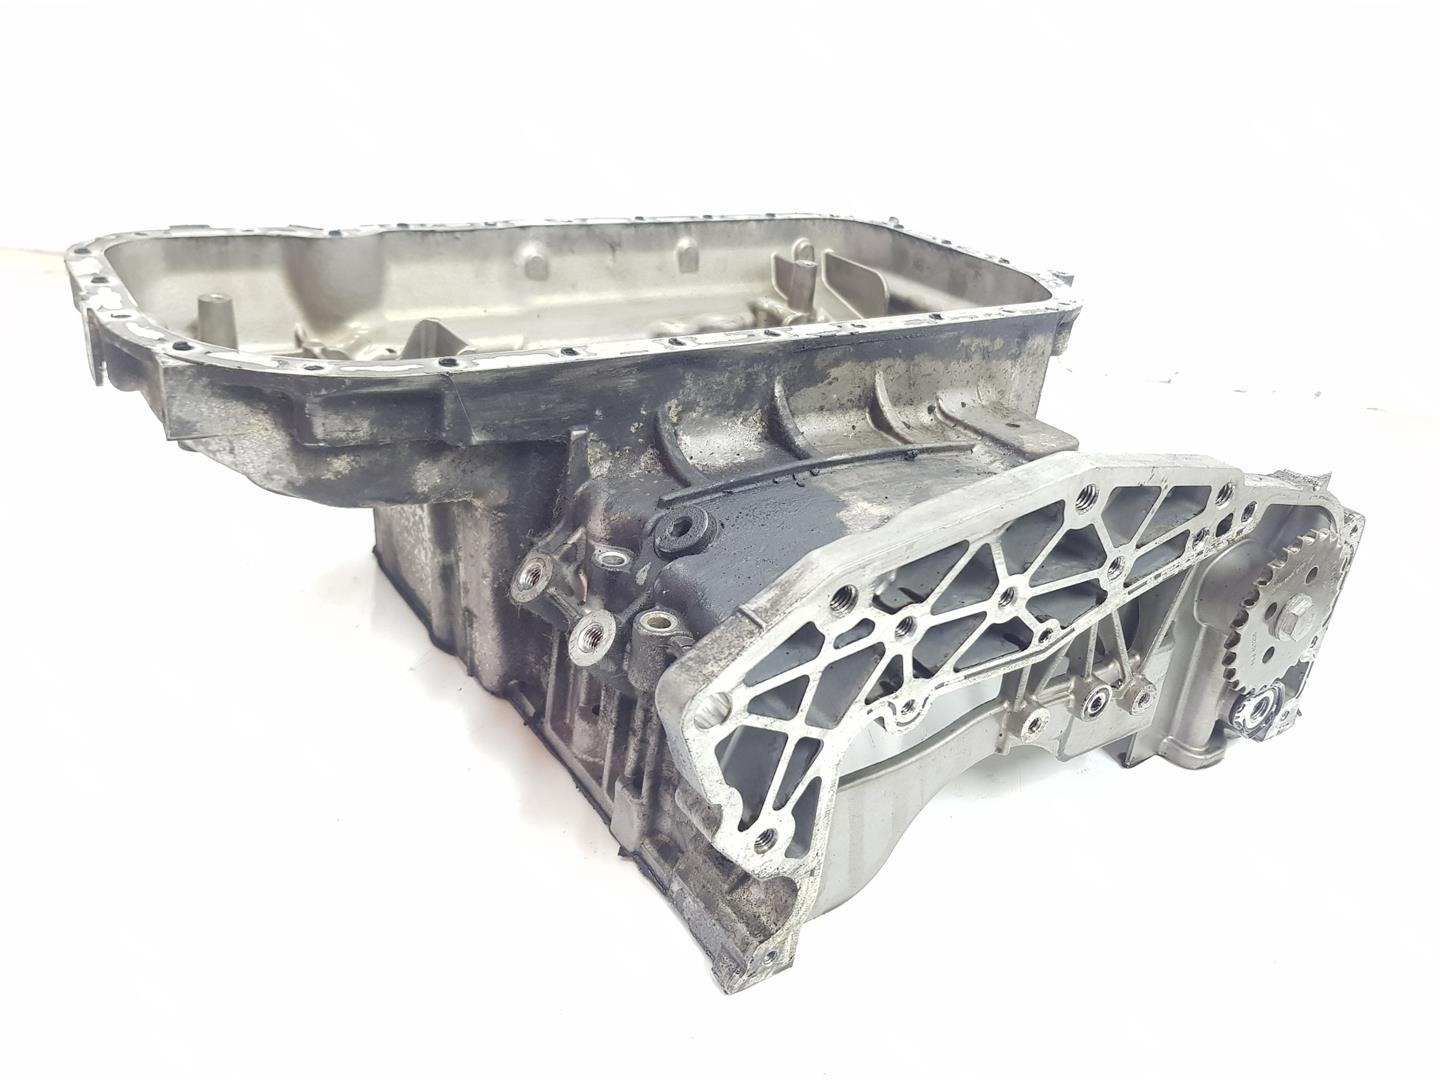 AUDI A5 8T (2007-2016) Other Engine Compartment Parts 059103601N, 059103601N, 1111AA 24684197